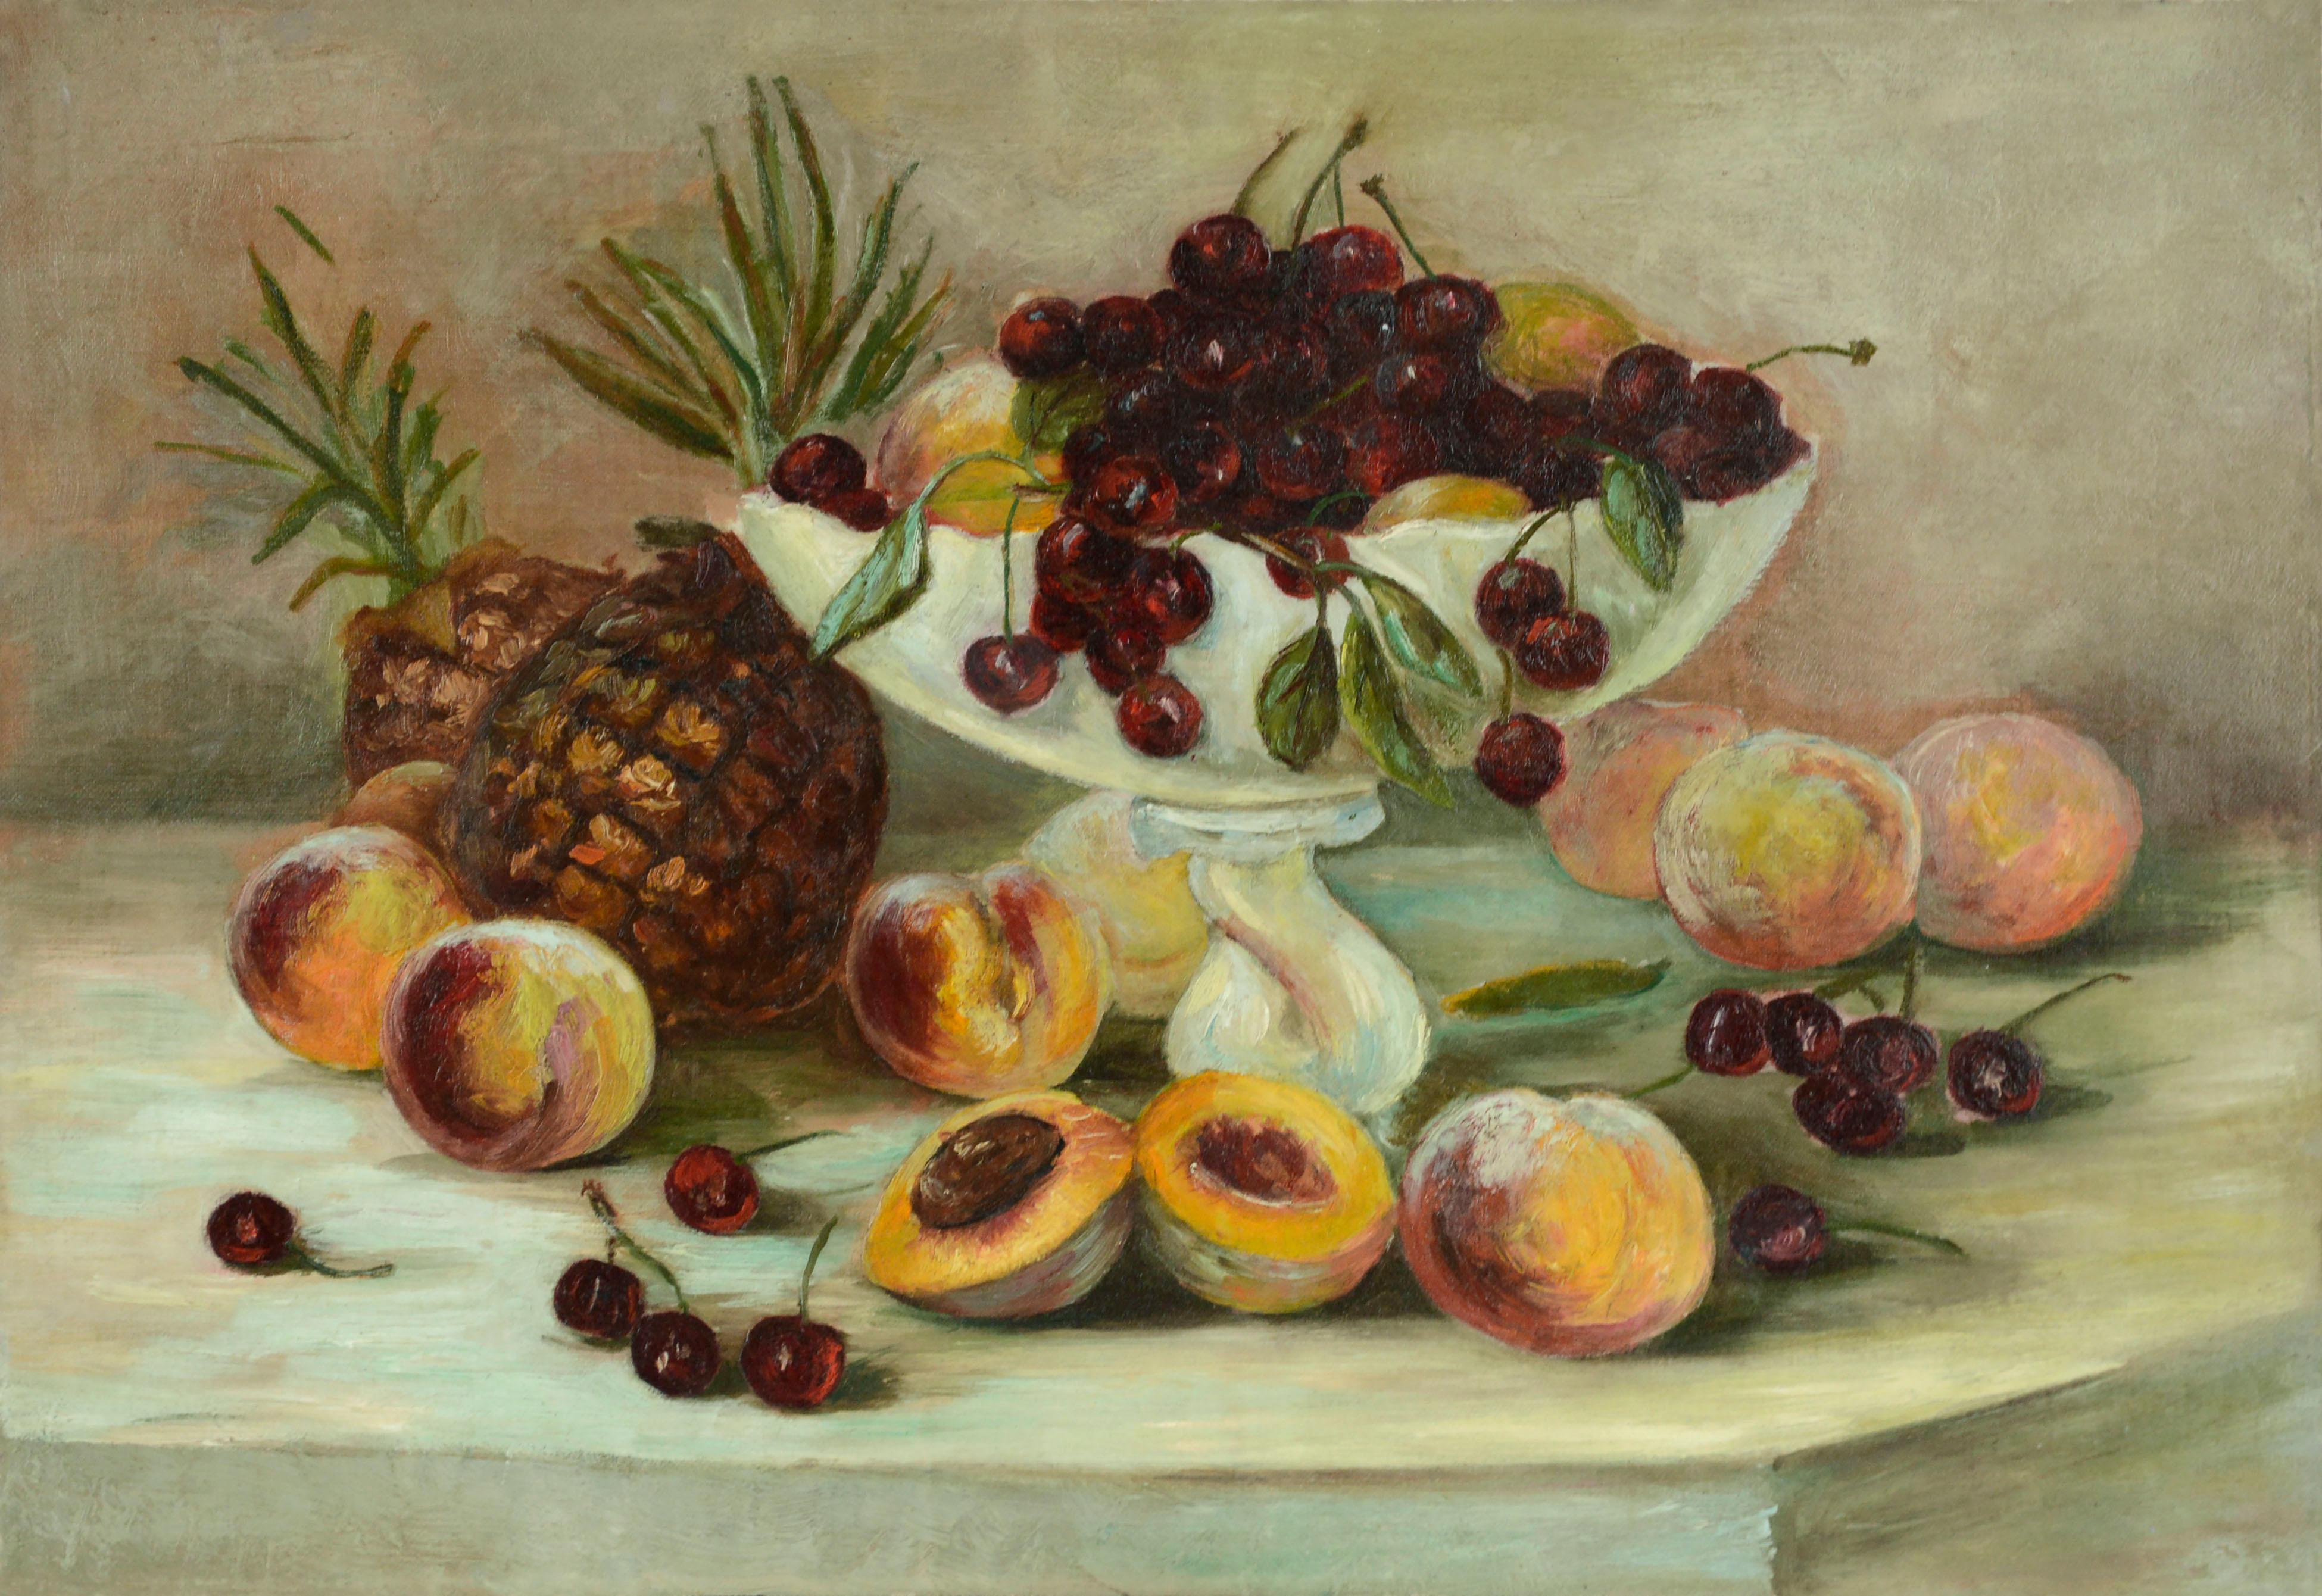 Summer Fruit Still-Life with Cherries, Peaches & Pineapple - After H. Raymond 